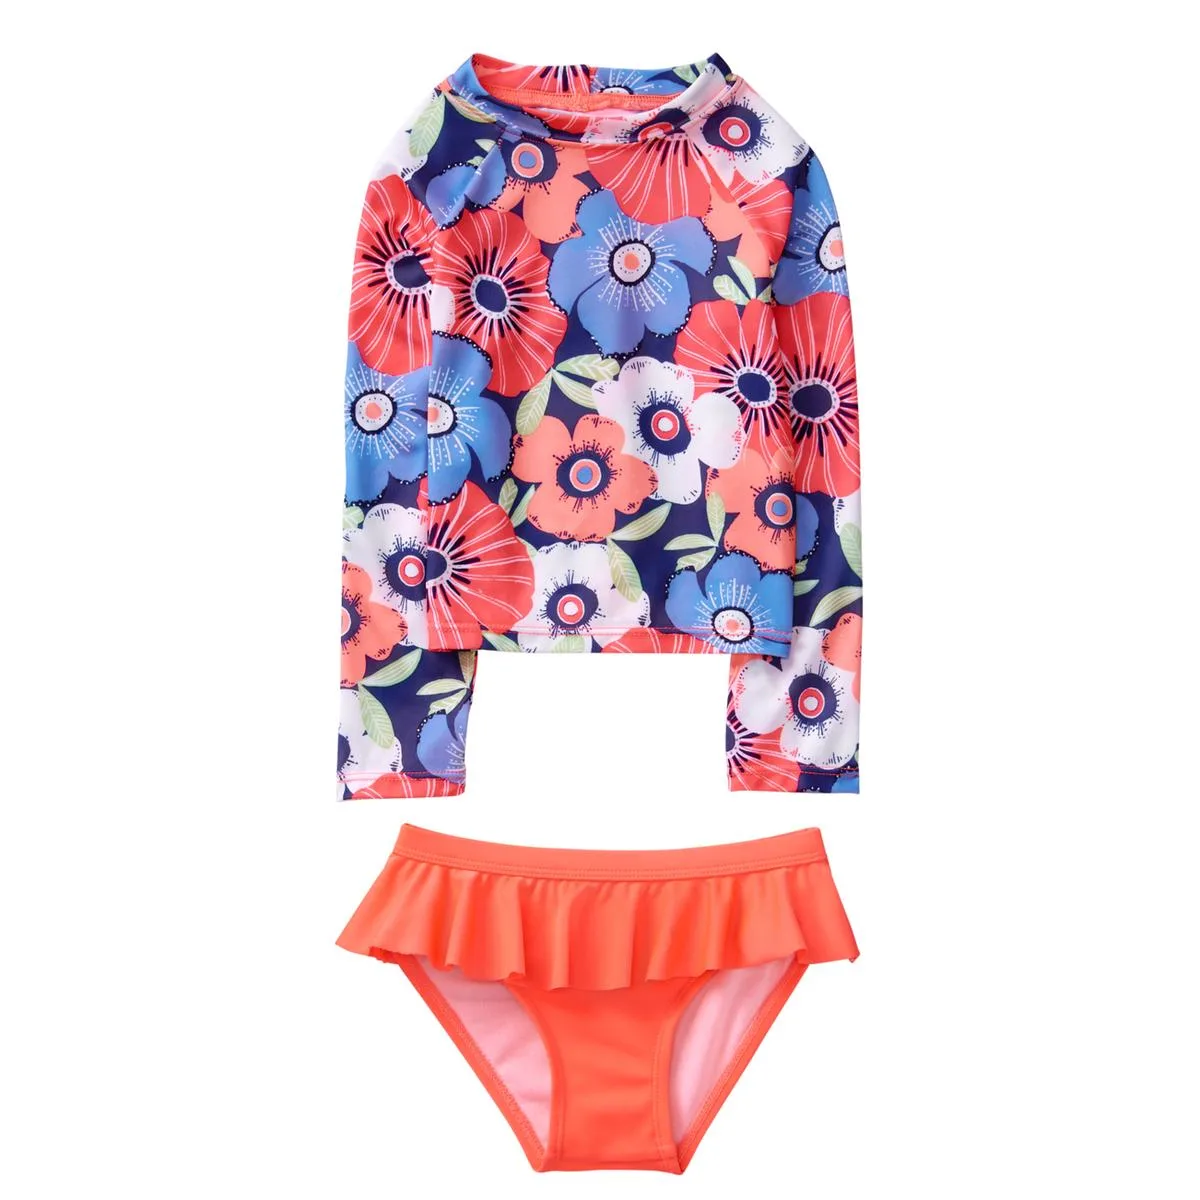 Most Adorable Toddler Girl Swimsuits - Serendipity And Spice